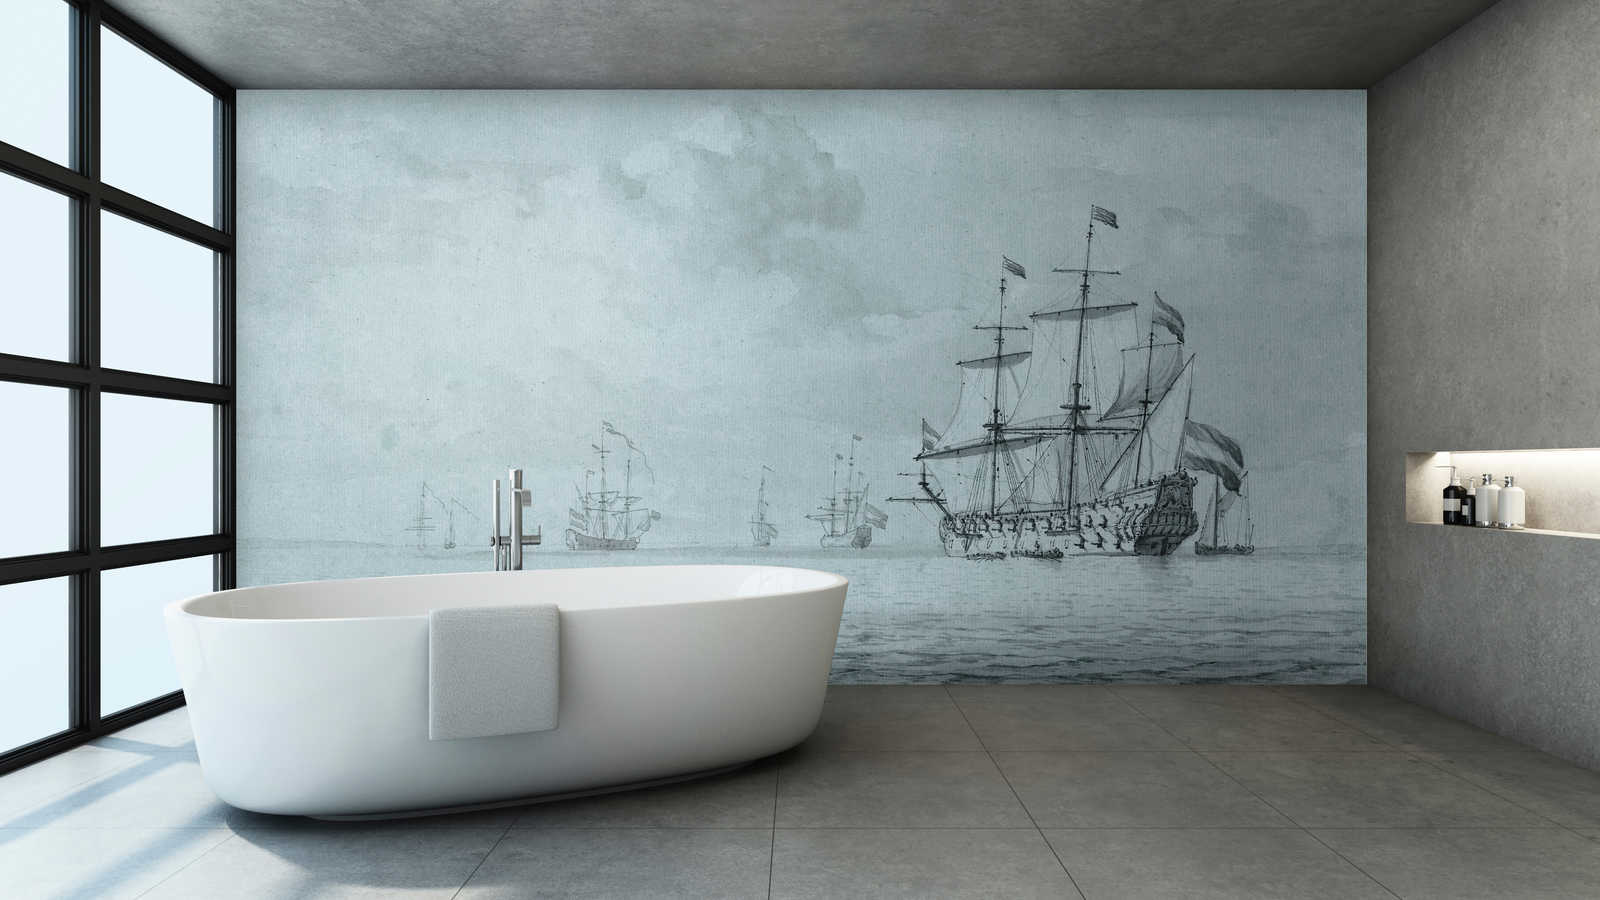             On the Sea 1 - grey blue photo wallpaper ships vintage painting style
        